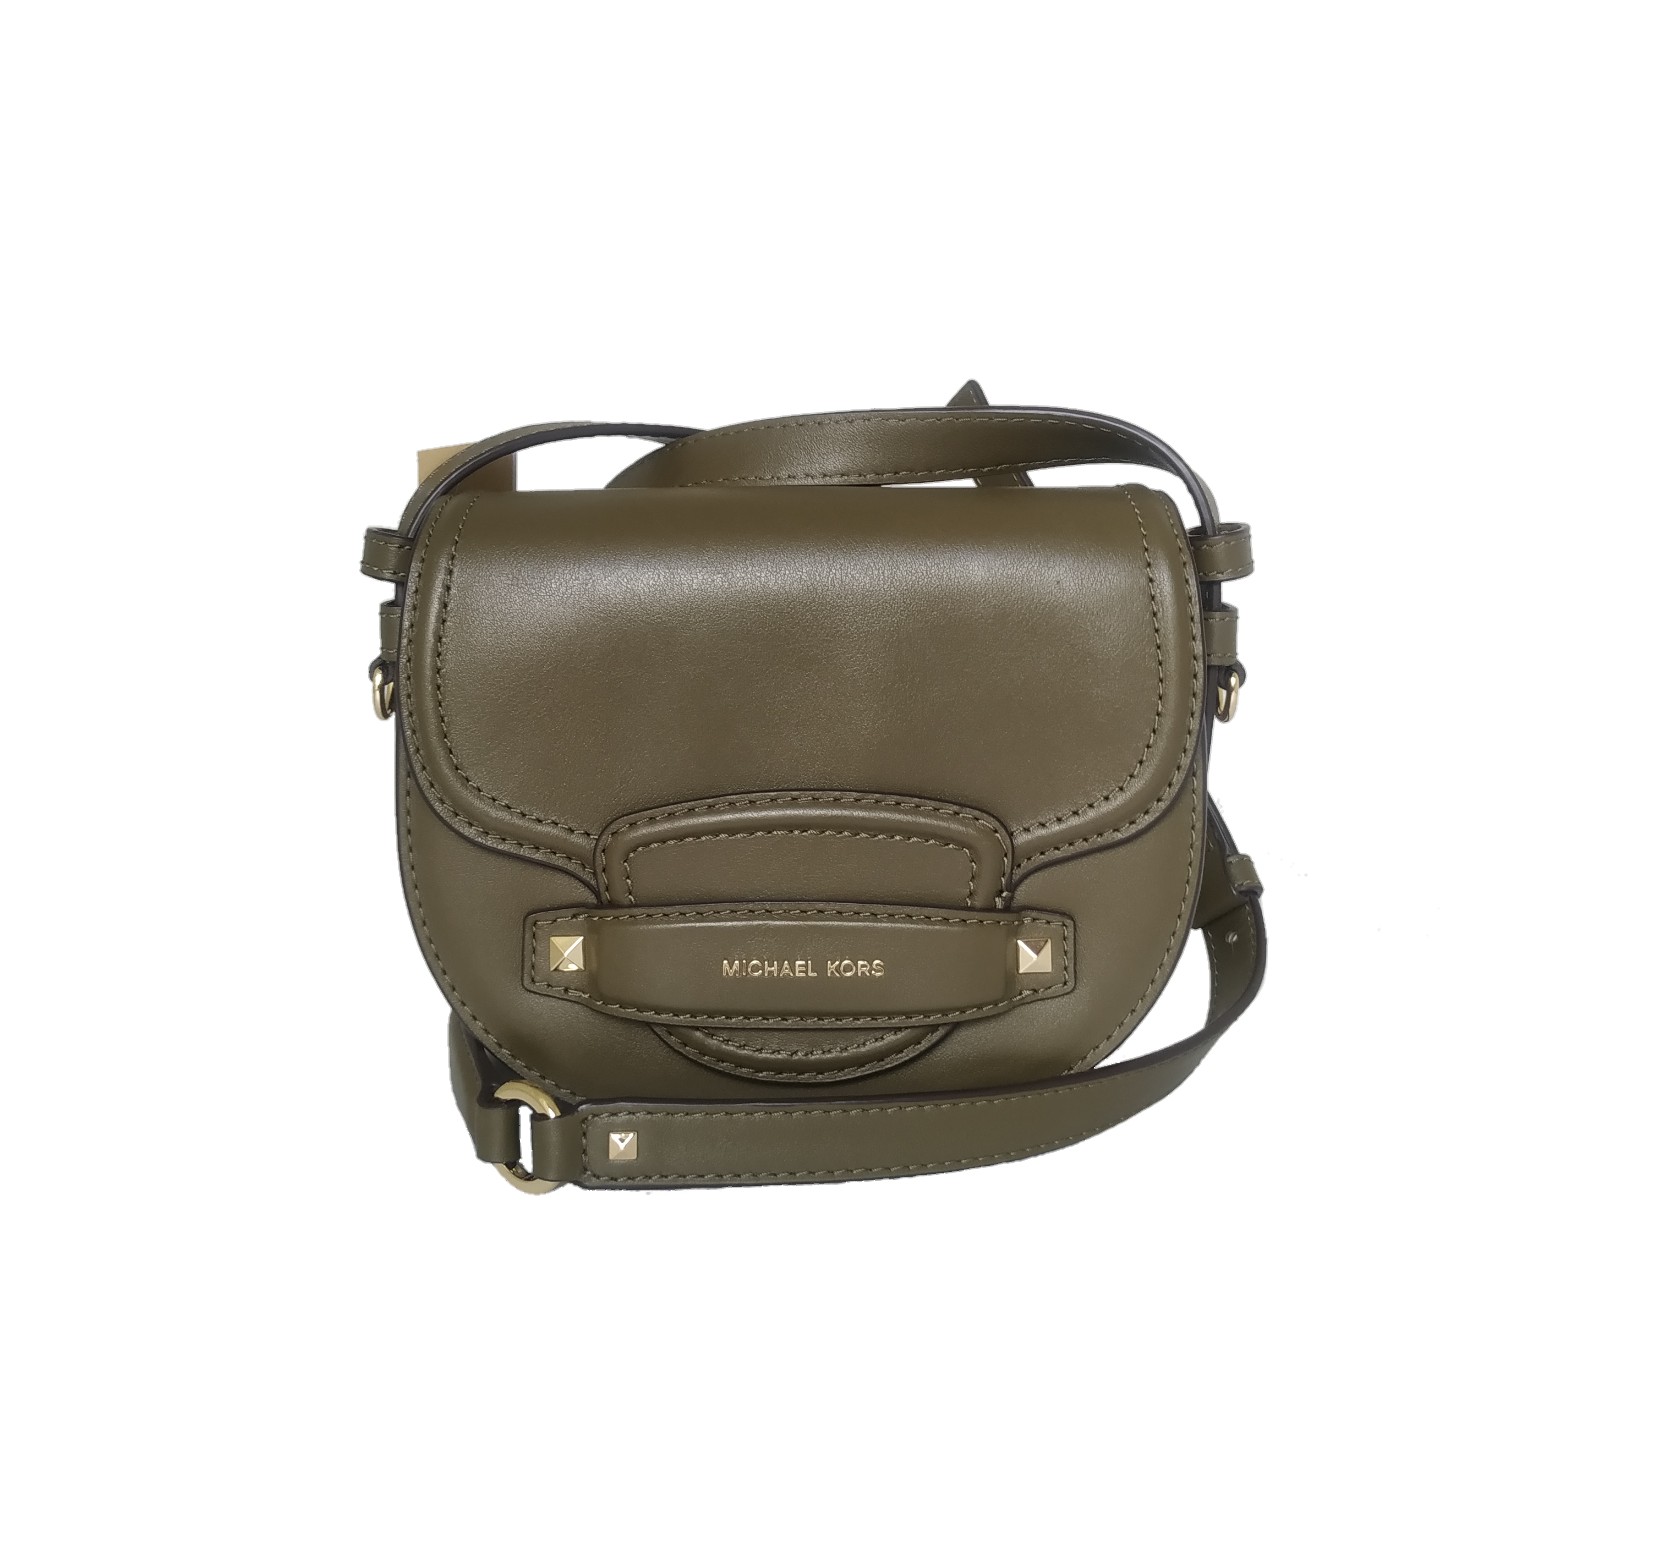 MK Michael Kors Cary Small Saddle Bag in Olive Leather - Earth Luxury